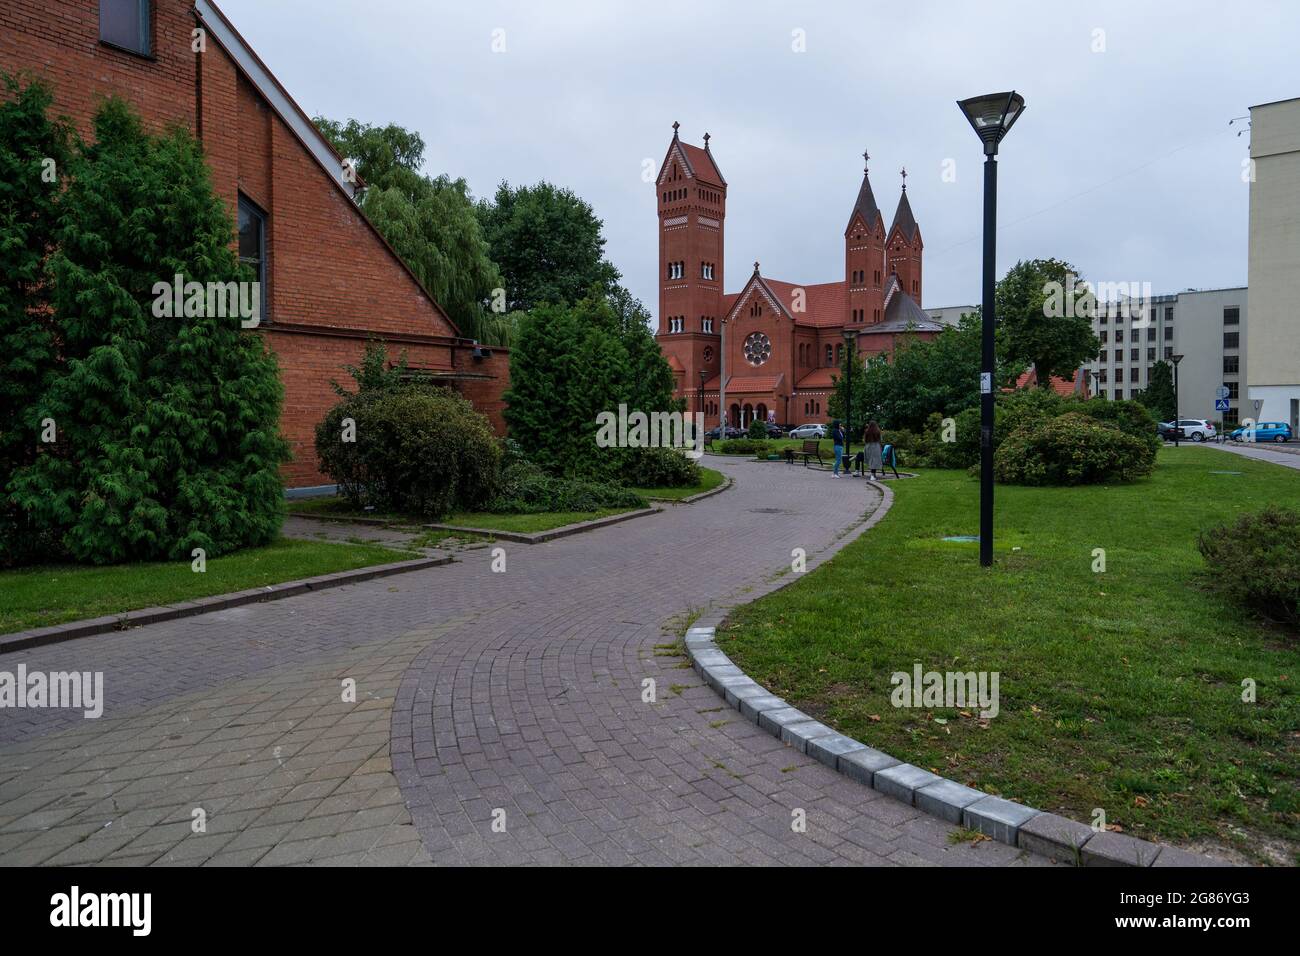 Minsk, capital of Belarus, Town centre on a cloudy day Stock Photo